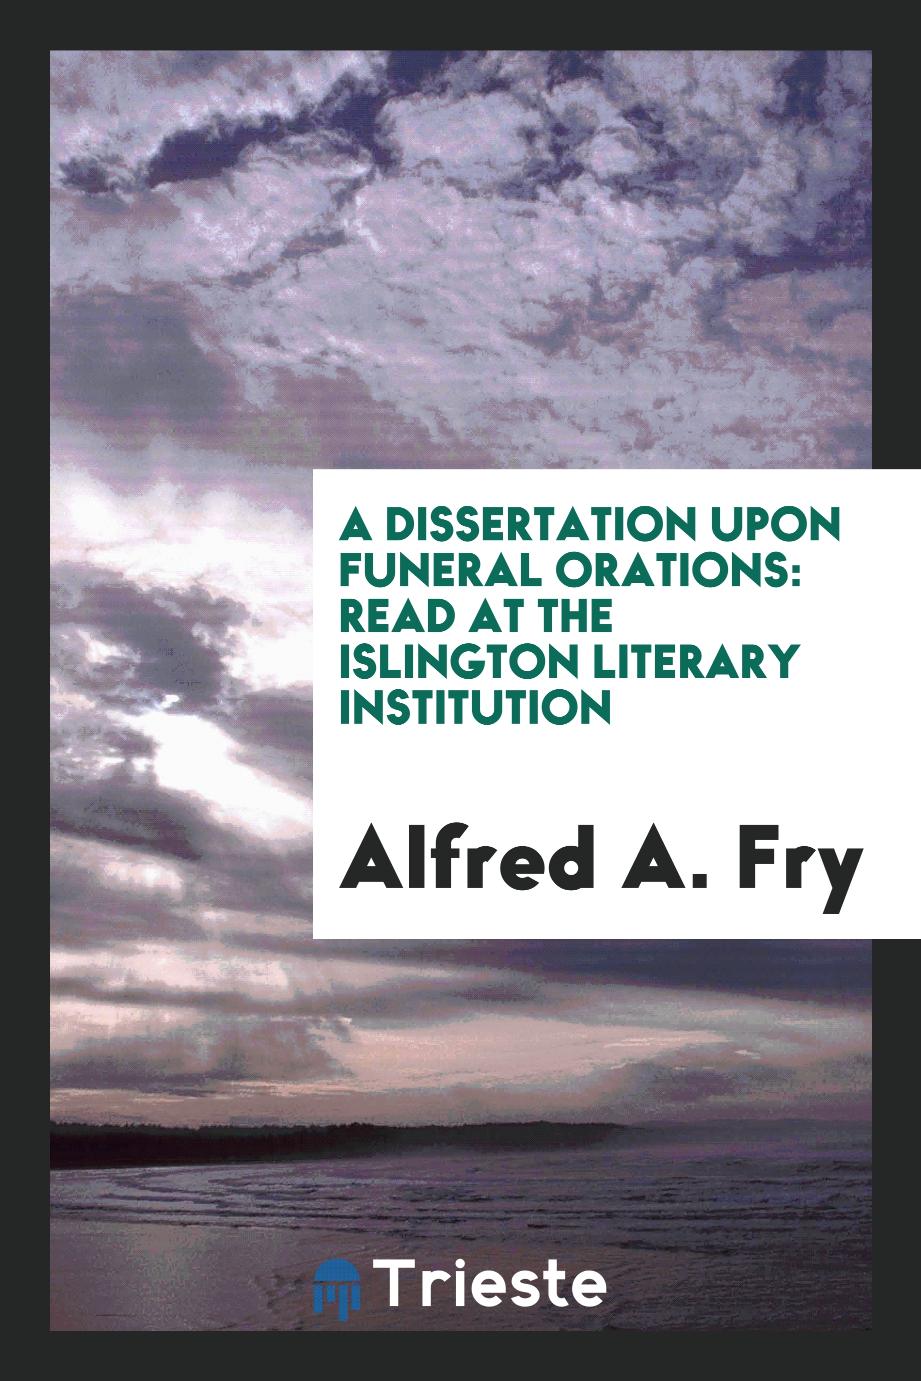 A Dissertation Upon Funeral Orations: Read at the Islington Literary Institution